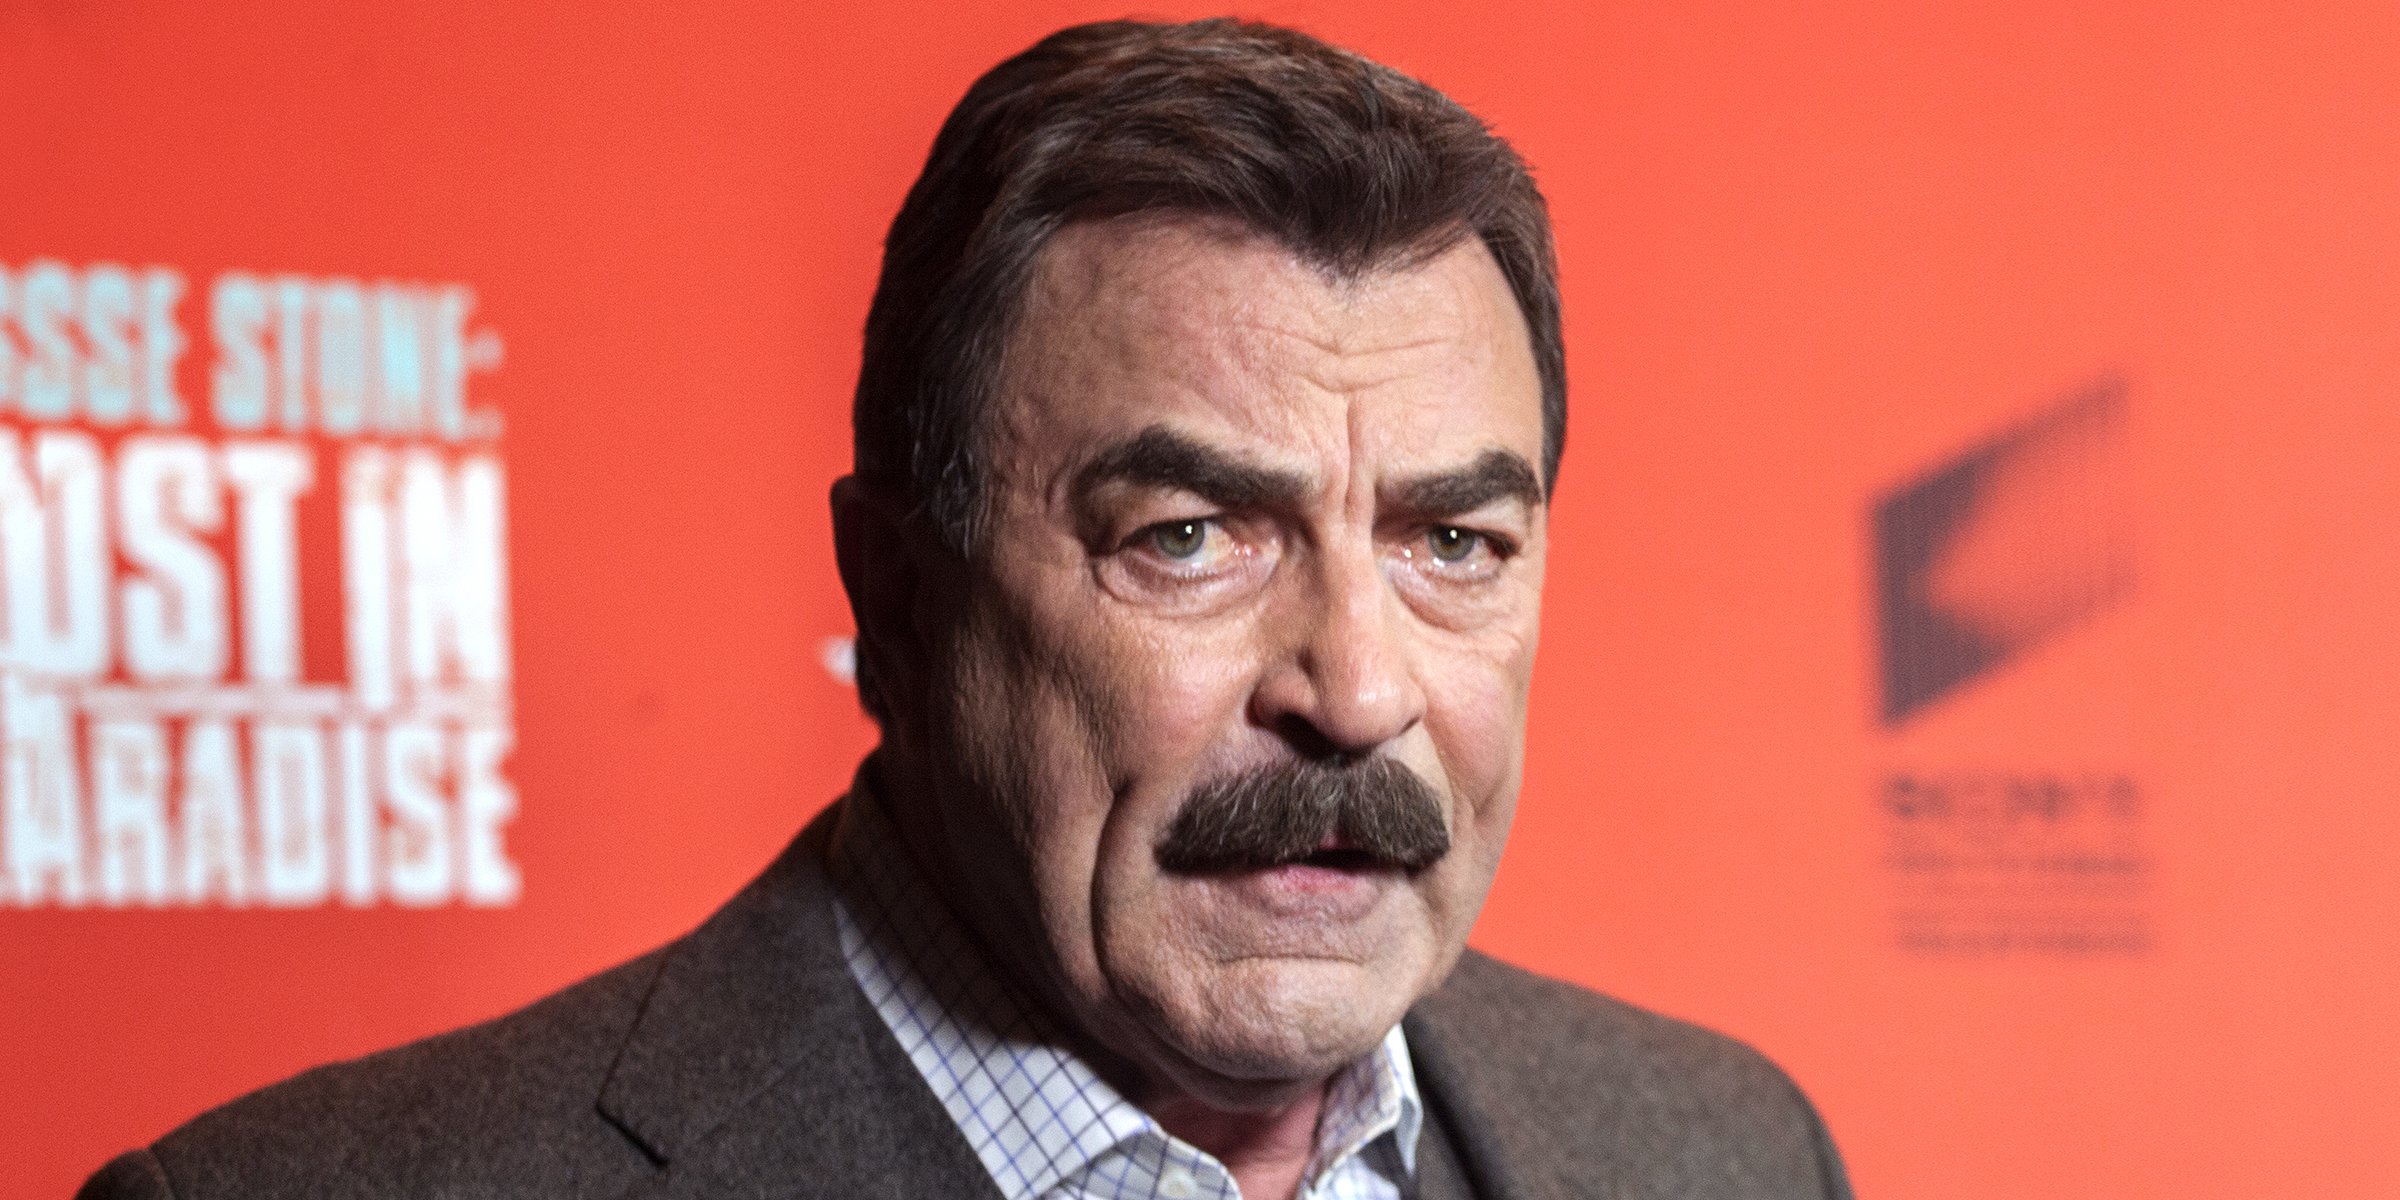 Tom Selleck | Source: Getty Images